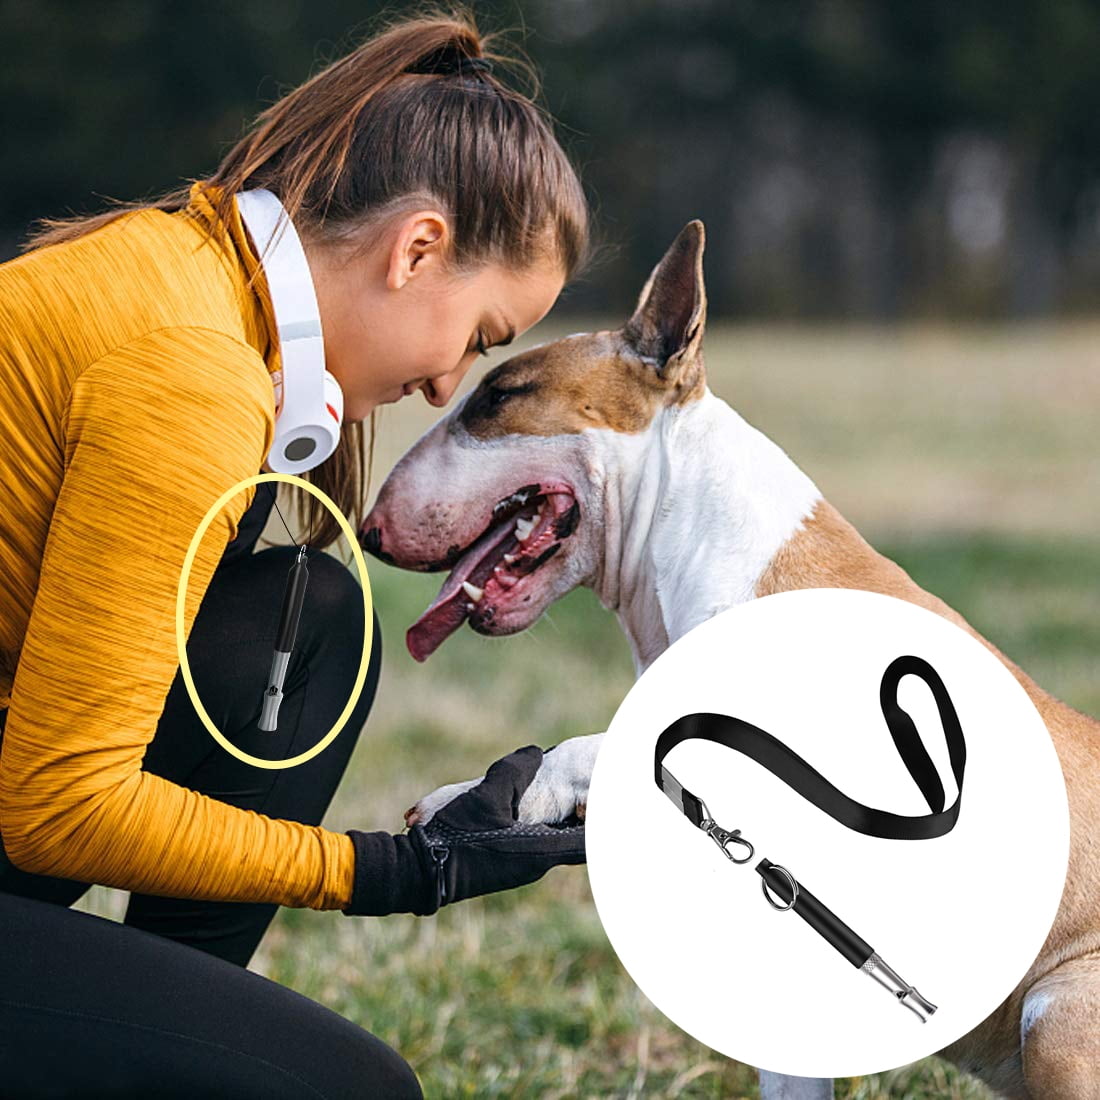 Adjustable Pitch Ultrasonic Dog Whistles to Stop Barking Professional Silent Dog Whistle Training Barking Control for Pet Dog with Black Strap Lanyard 2 Pack Dog Whistle Dog Whistle for Dogs 